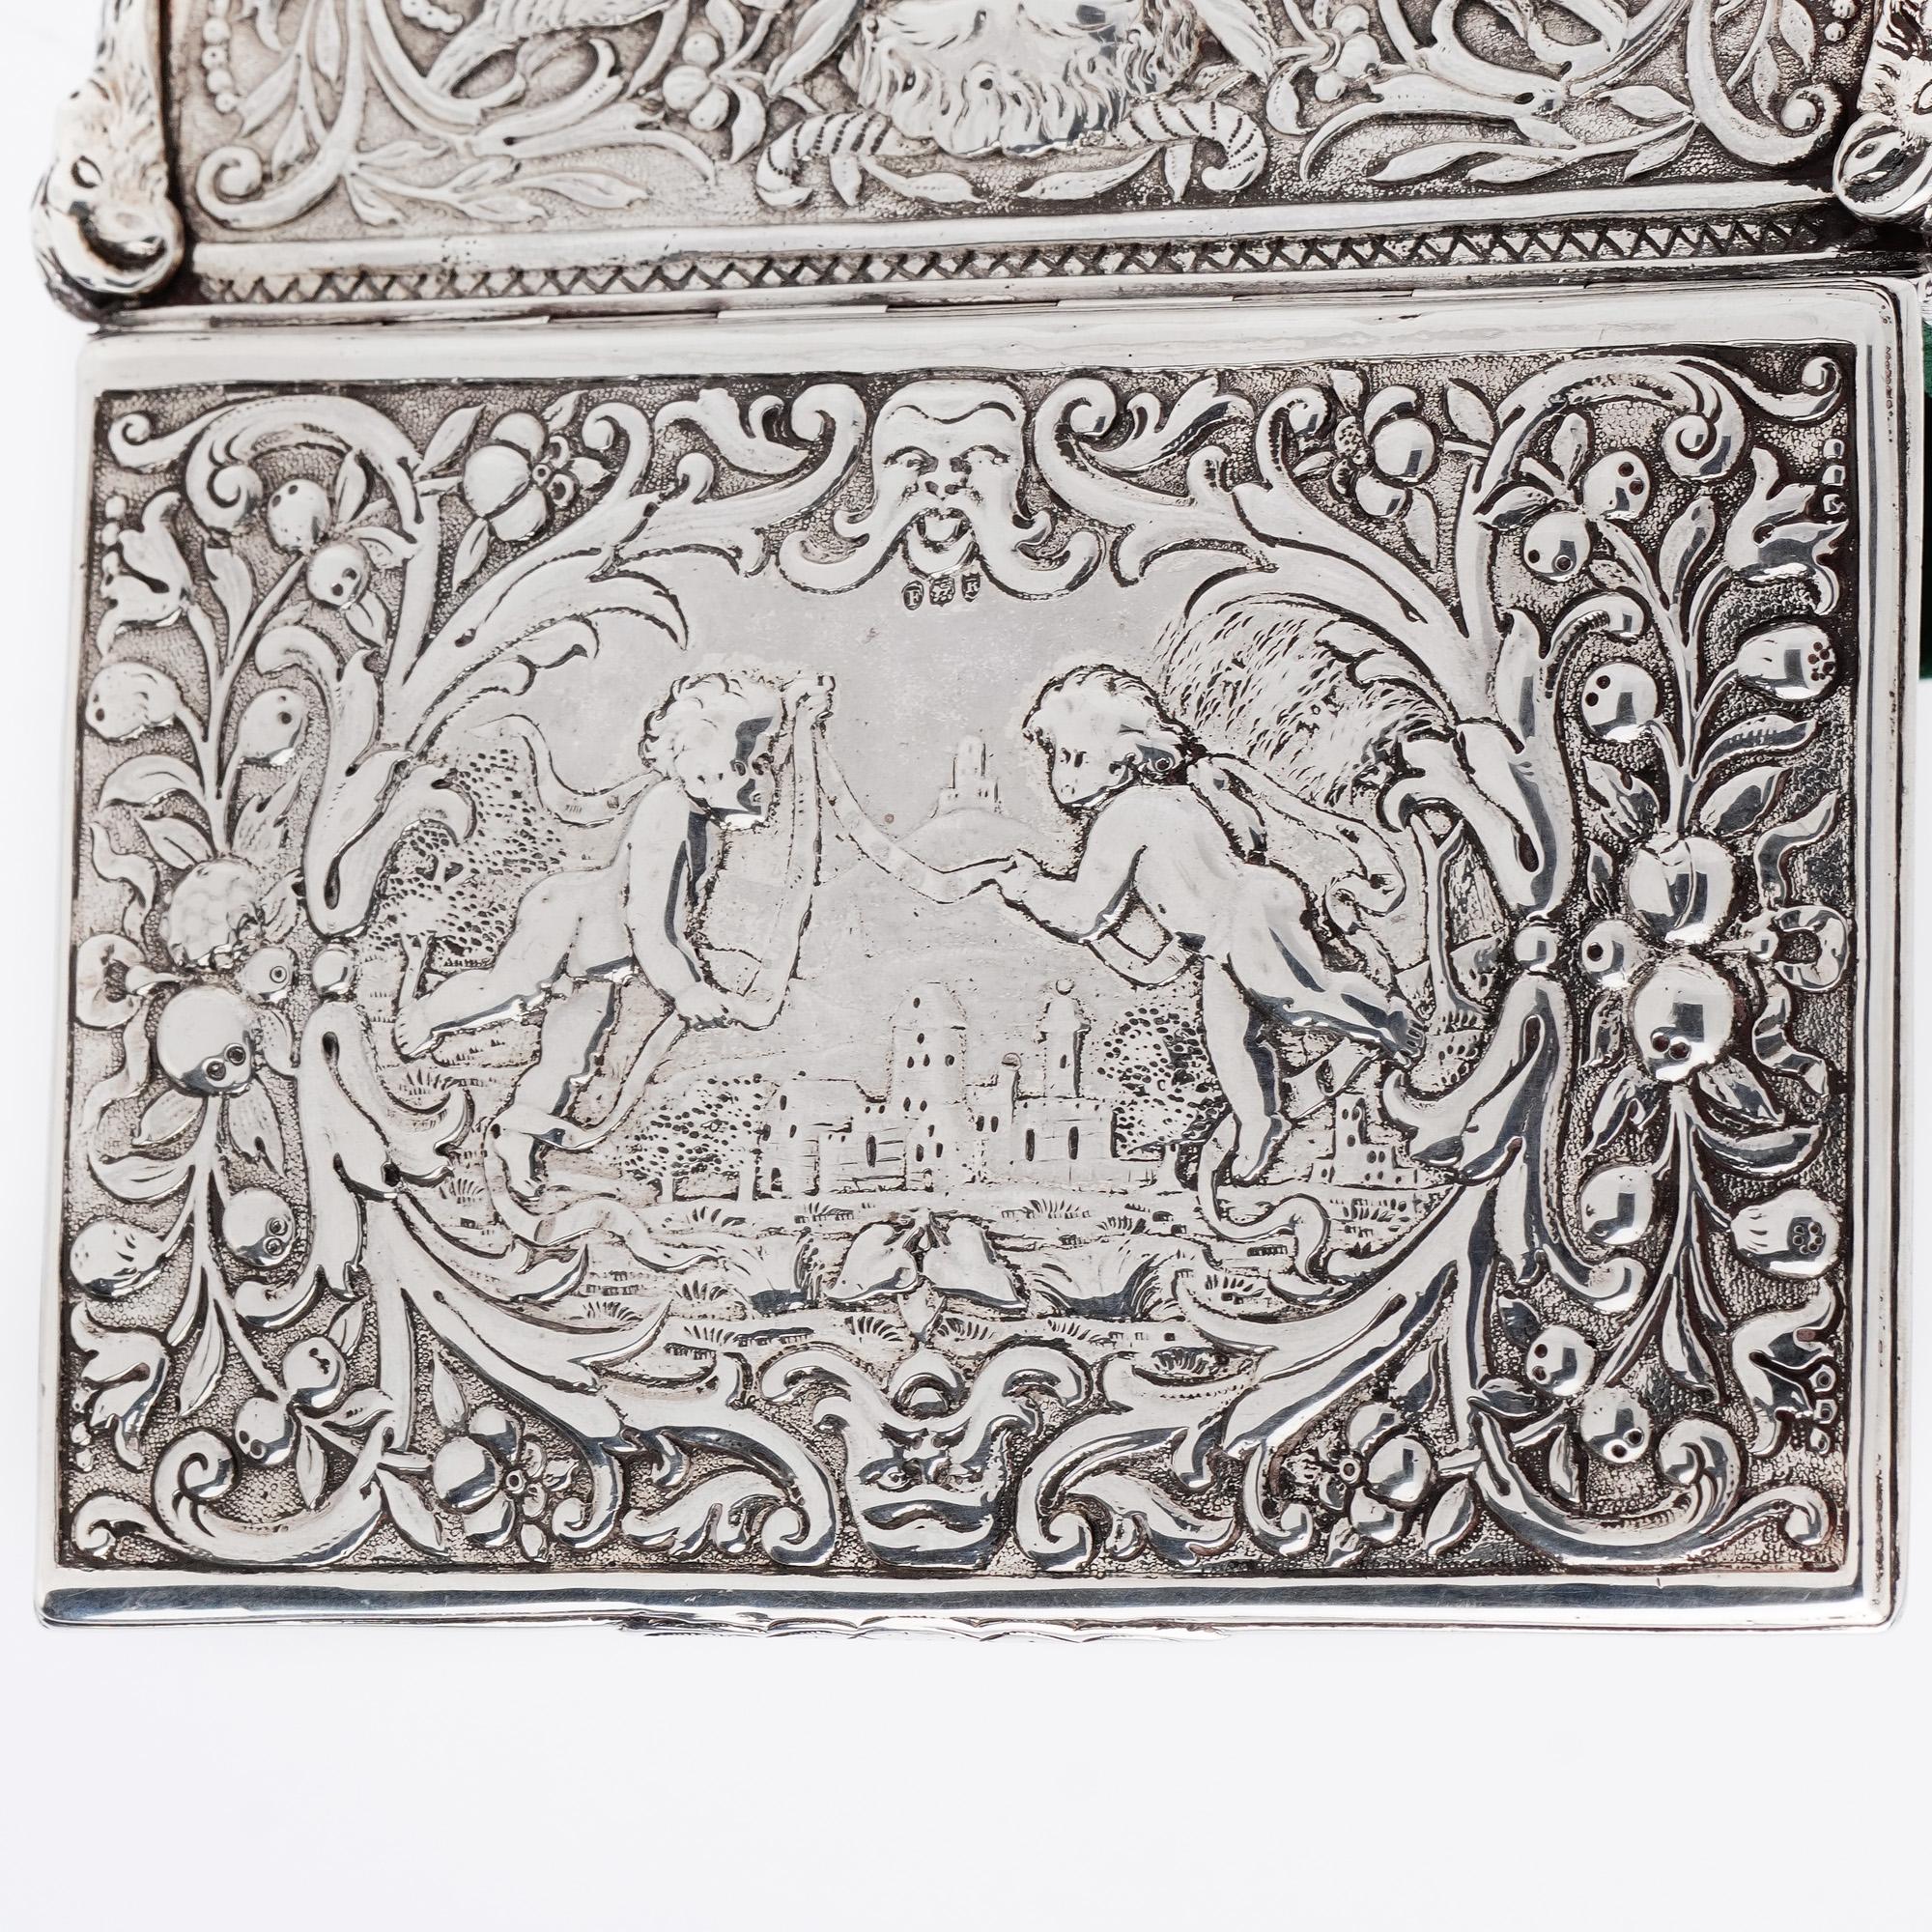 Antique Late 19th Century Silver Repoussé Decorated Jewellery Box with Cherubs For Sale 5